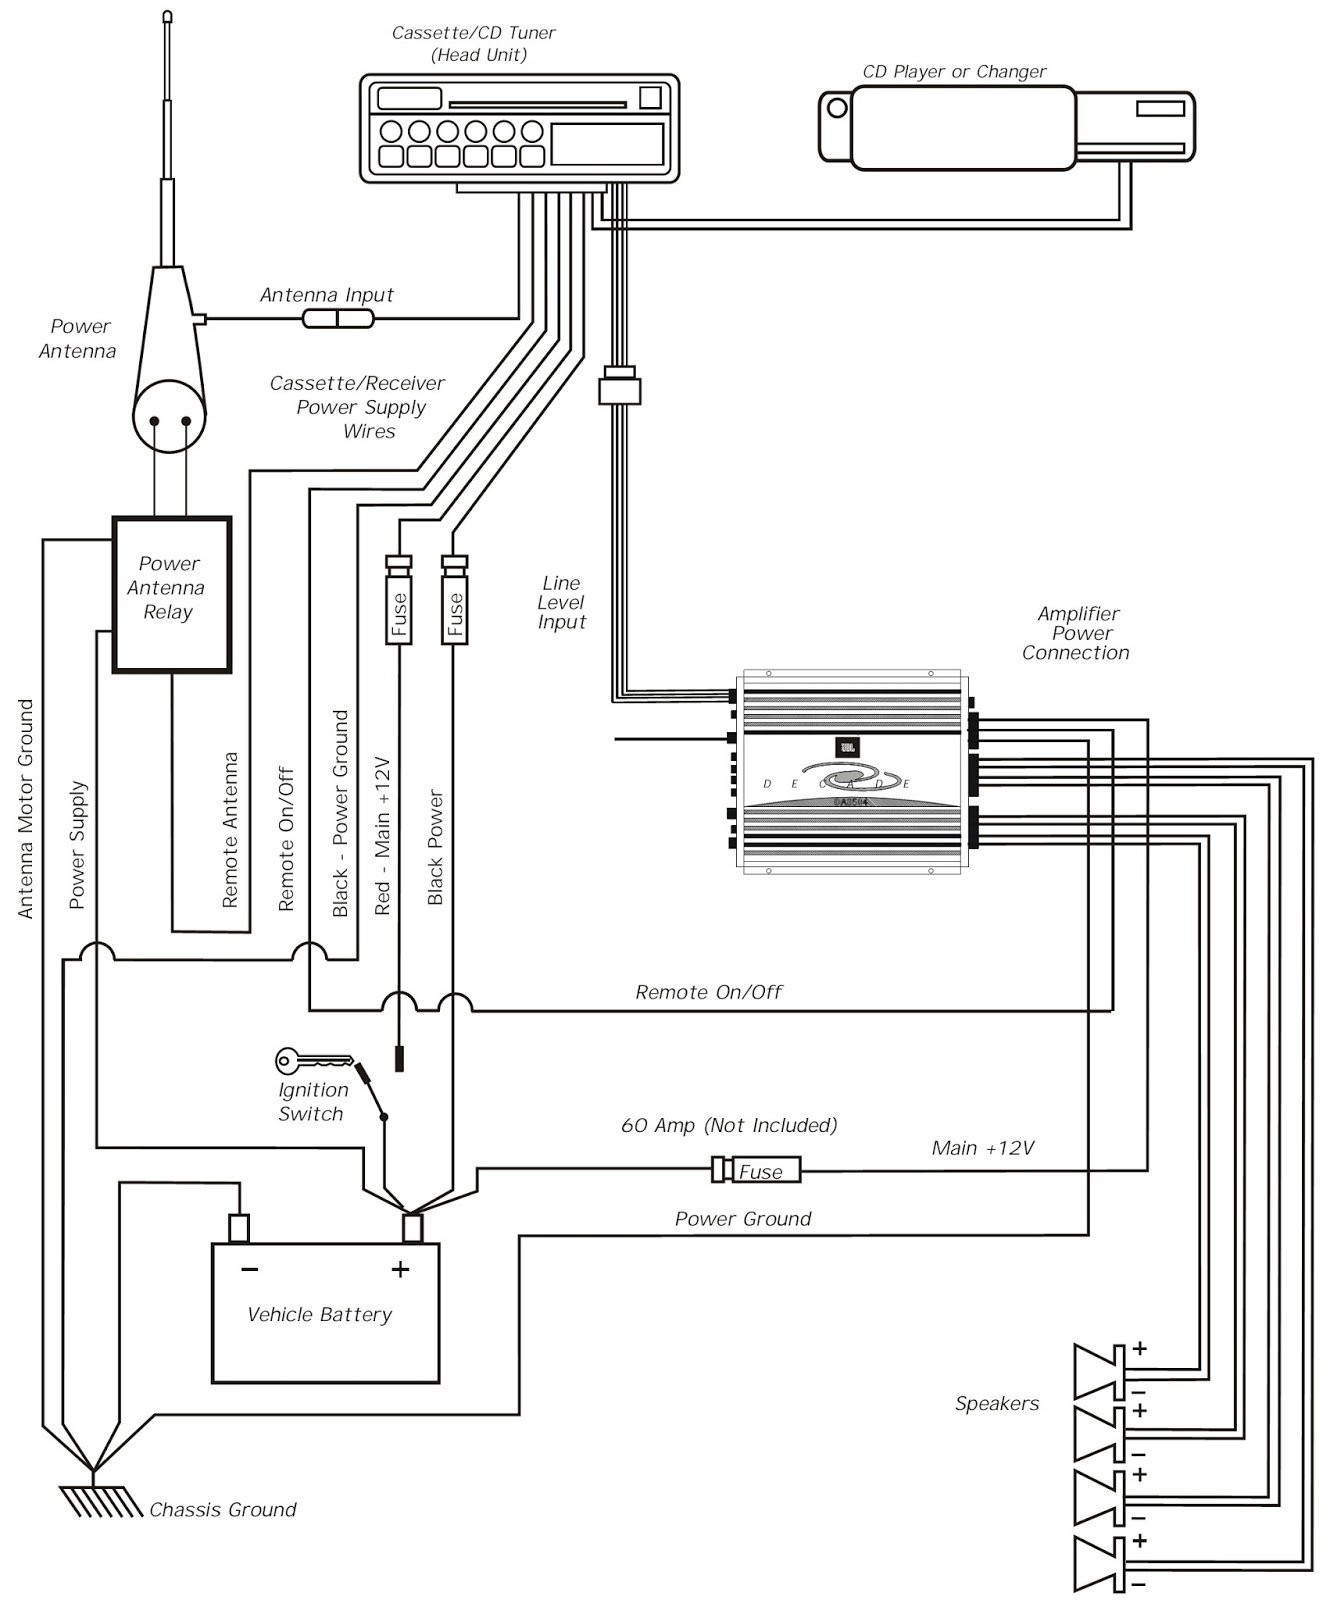 Wiring Diagram for Amplifier and Subwoofer Inspirationa Inspirational 2 Channel Amp Wiring Diagram